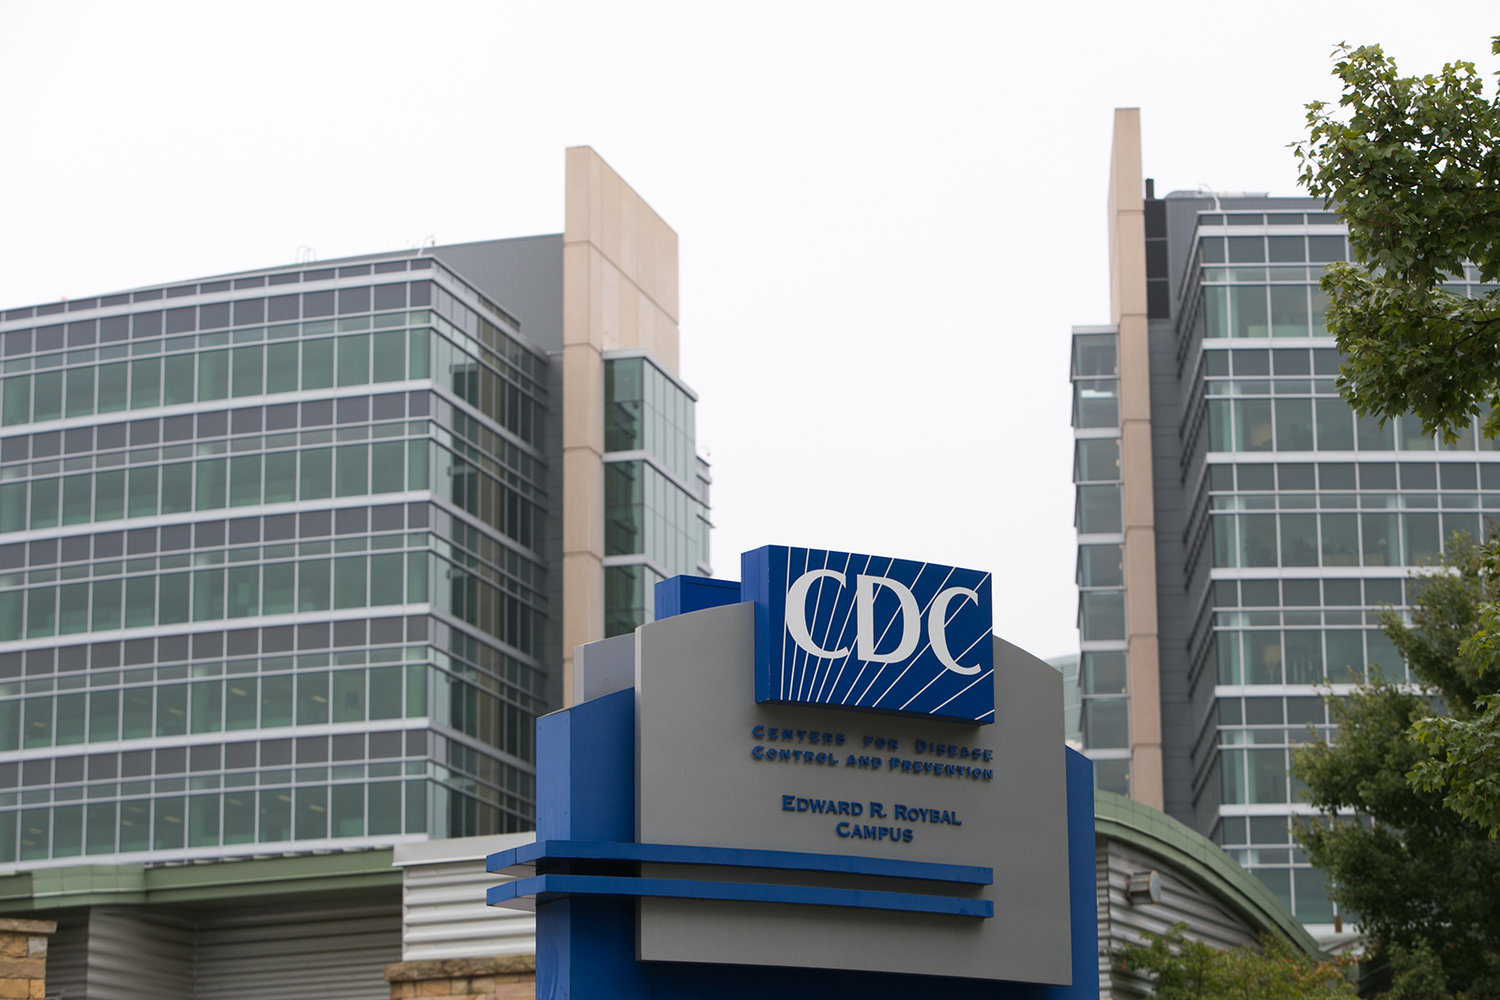 Exterior of the Center for Disease Control (CDC) headquarters is seen on Oct. 13, 2014, in Atlanta, Georgia. (Jessica McGowan/Getty Images/TNS)